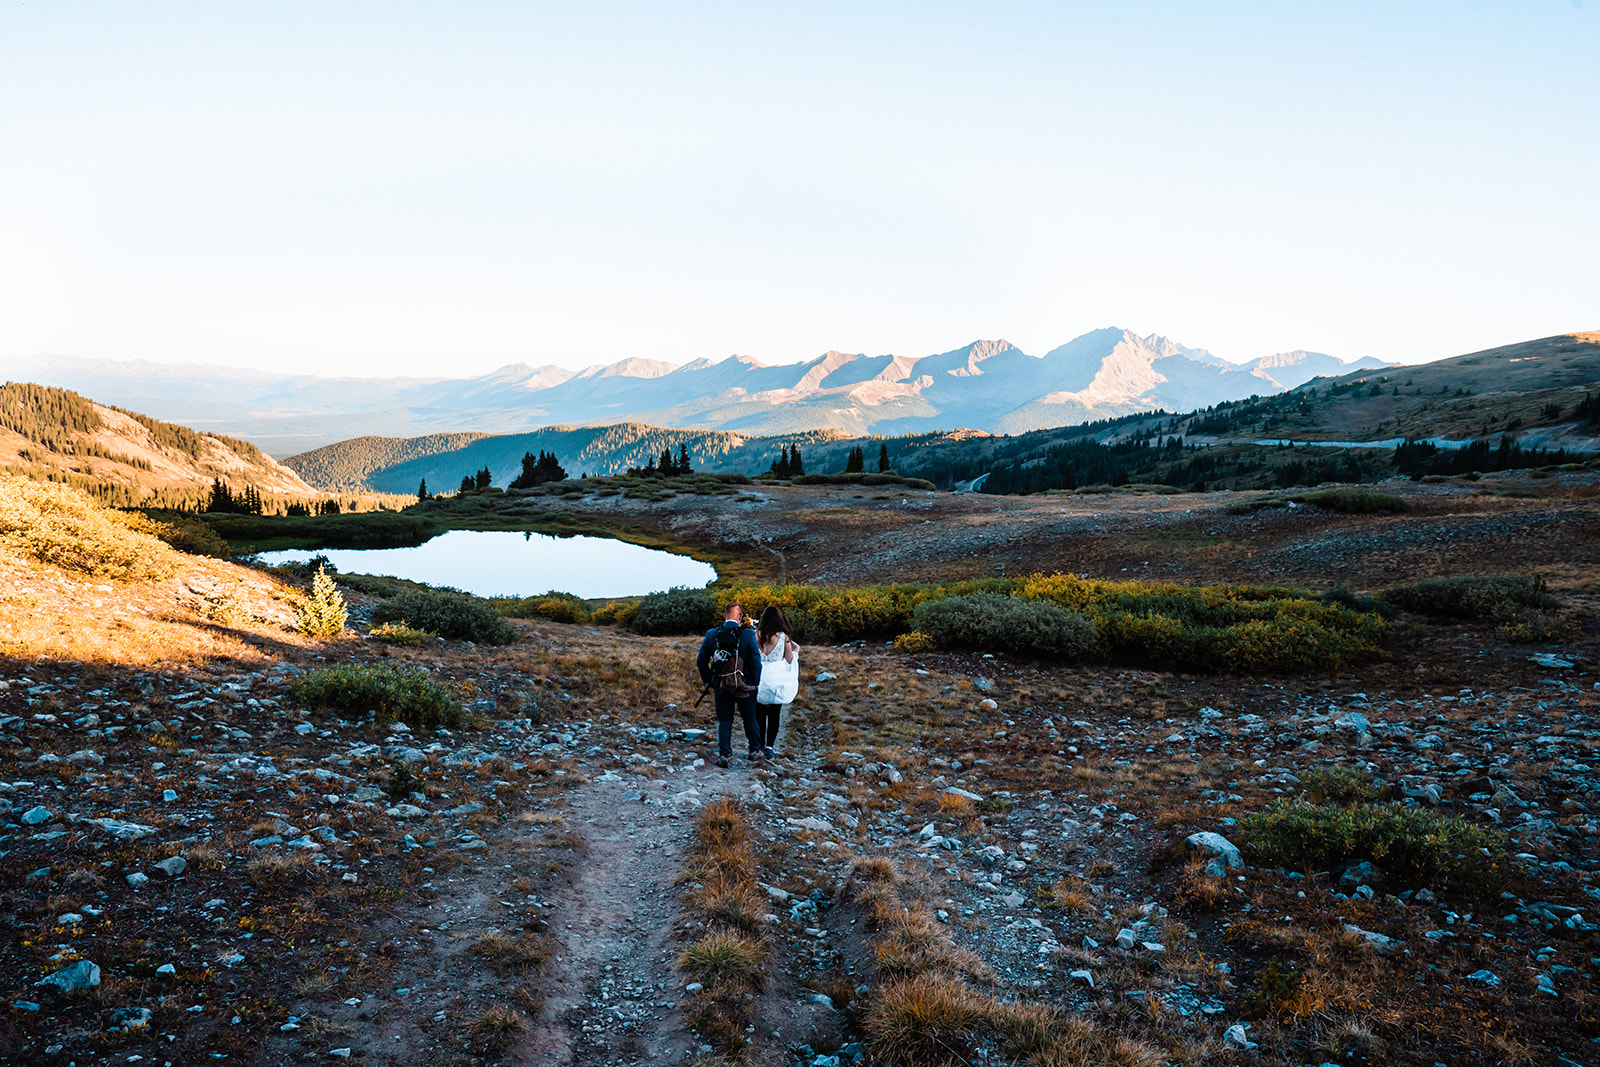 Adventure hiking elopement Photos at a High Alpine Lake in Colorado